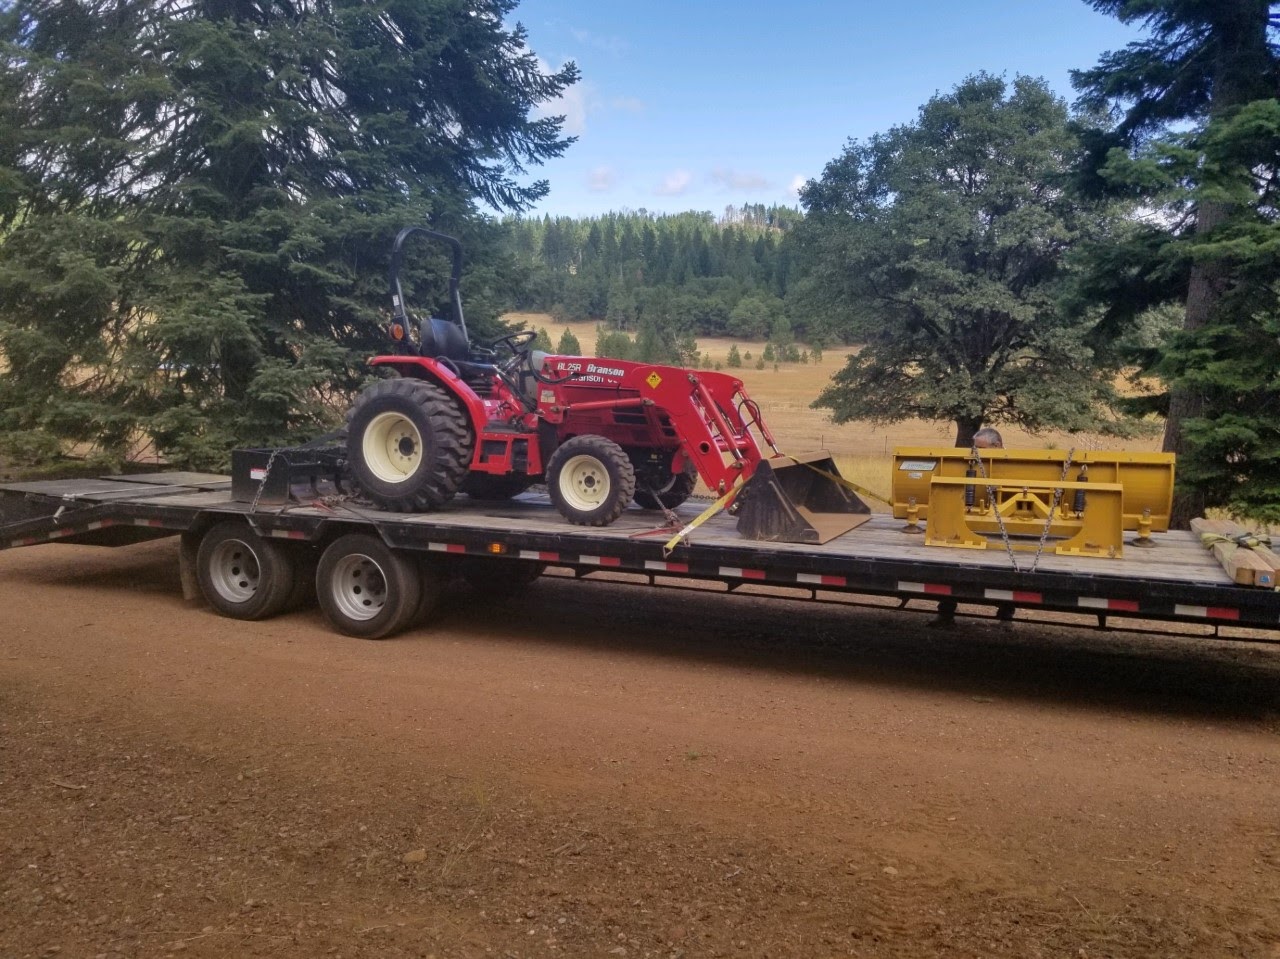 Branson BL25R Tractor loaded for transport